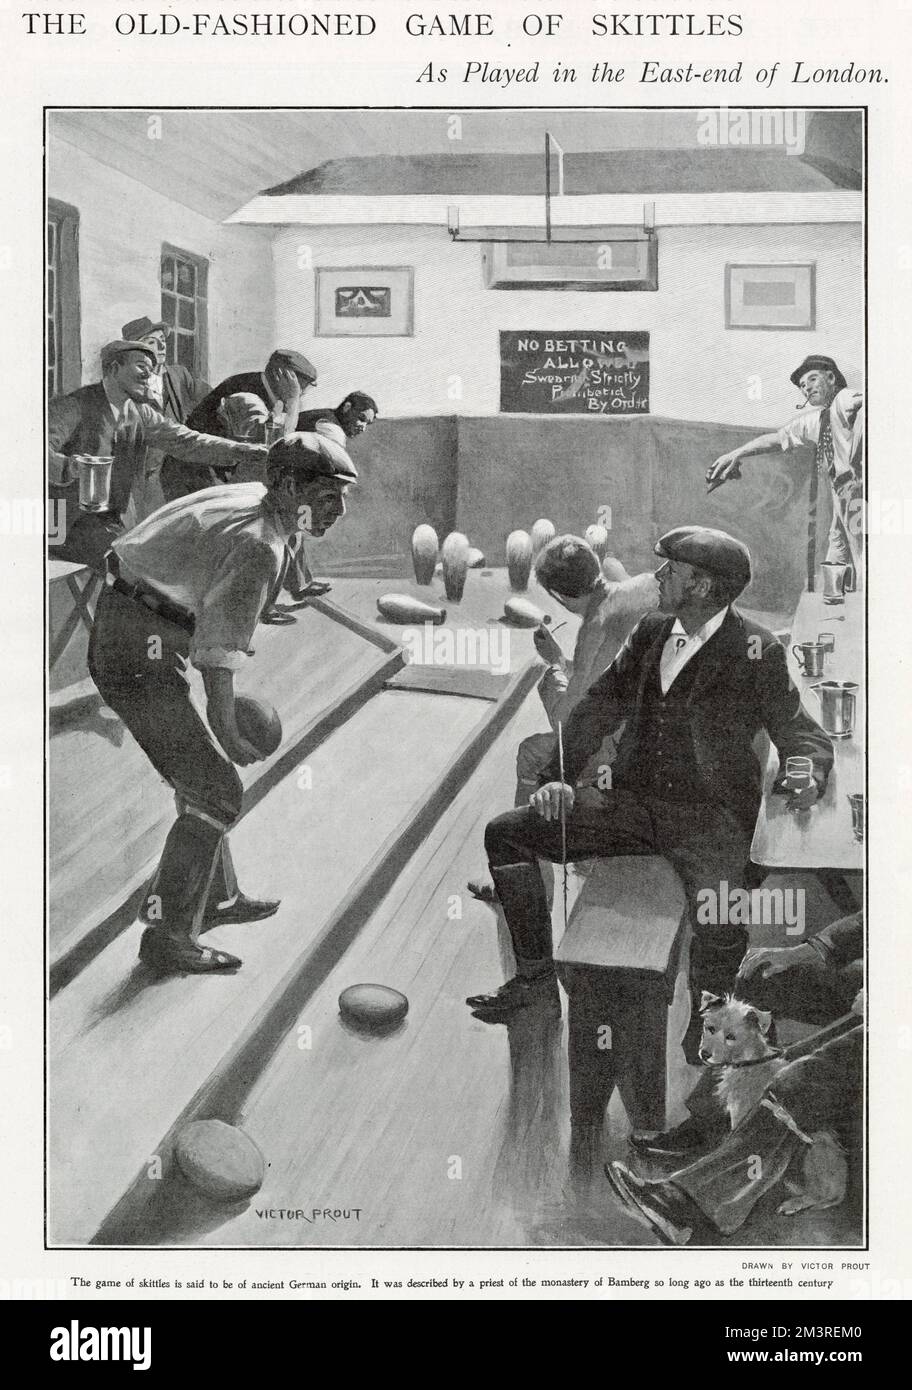 Men playing Skittles inside in the East End, London pub. Stock Photo